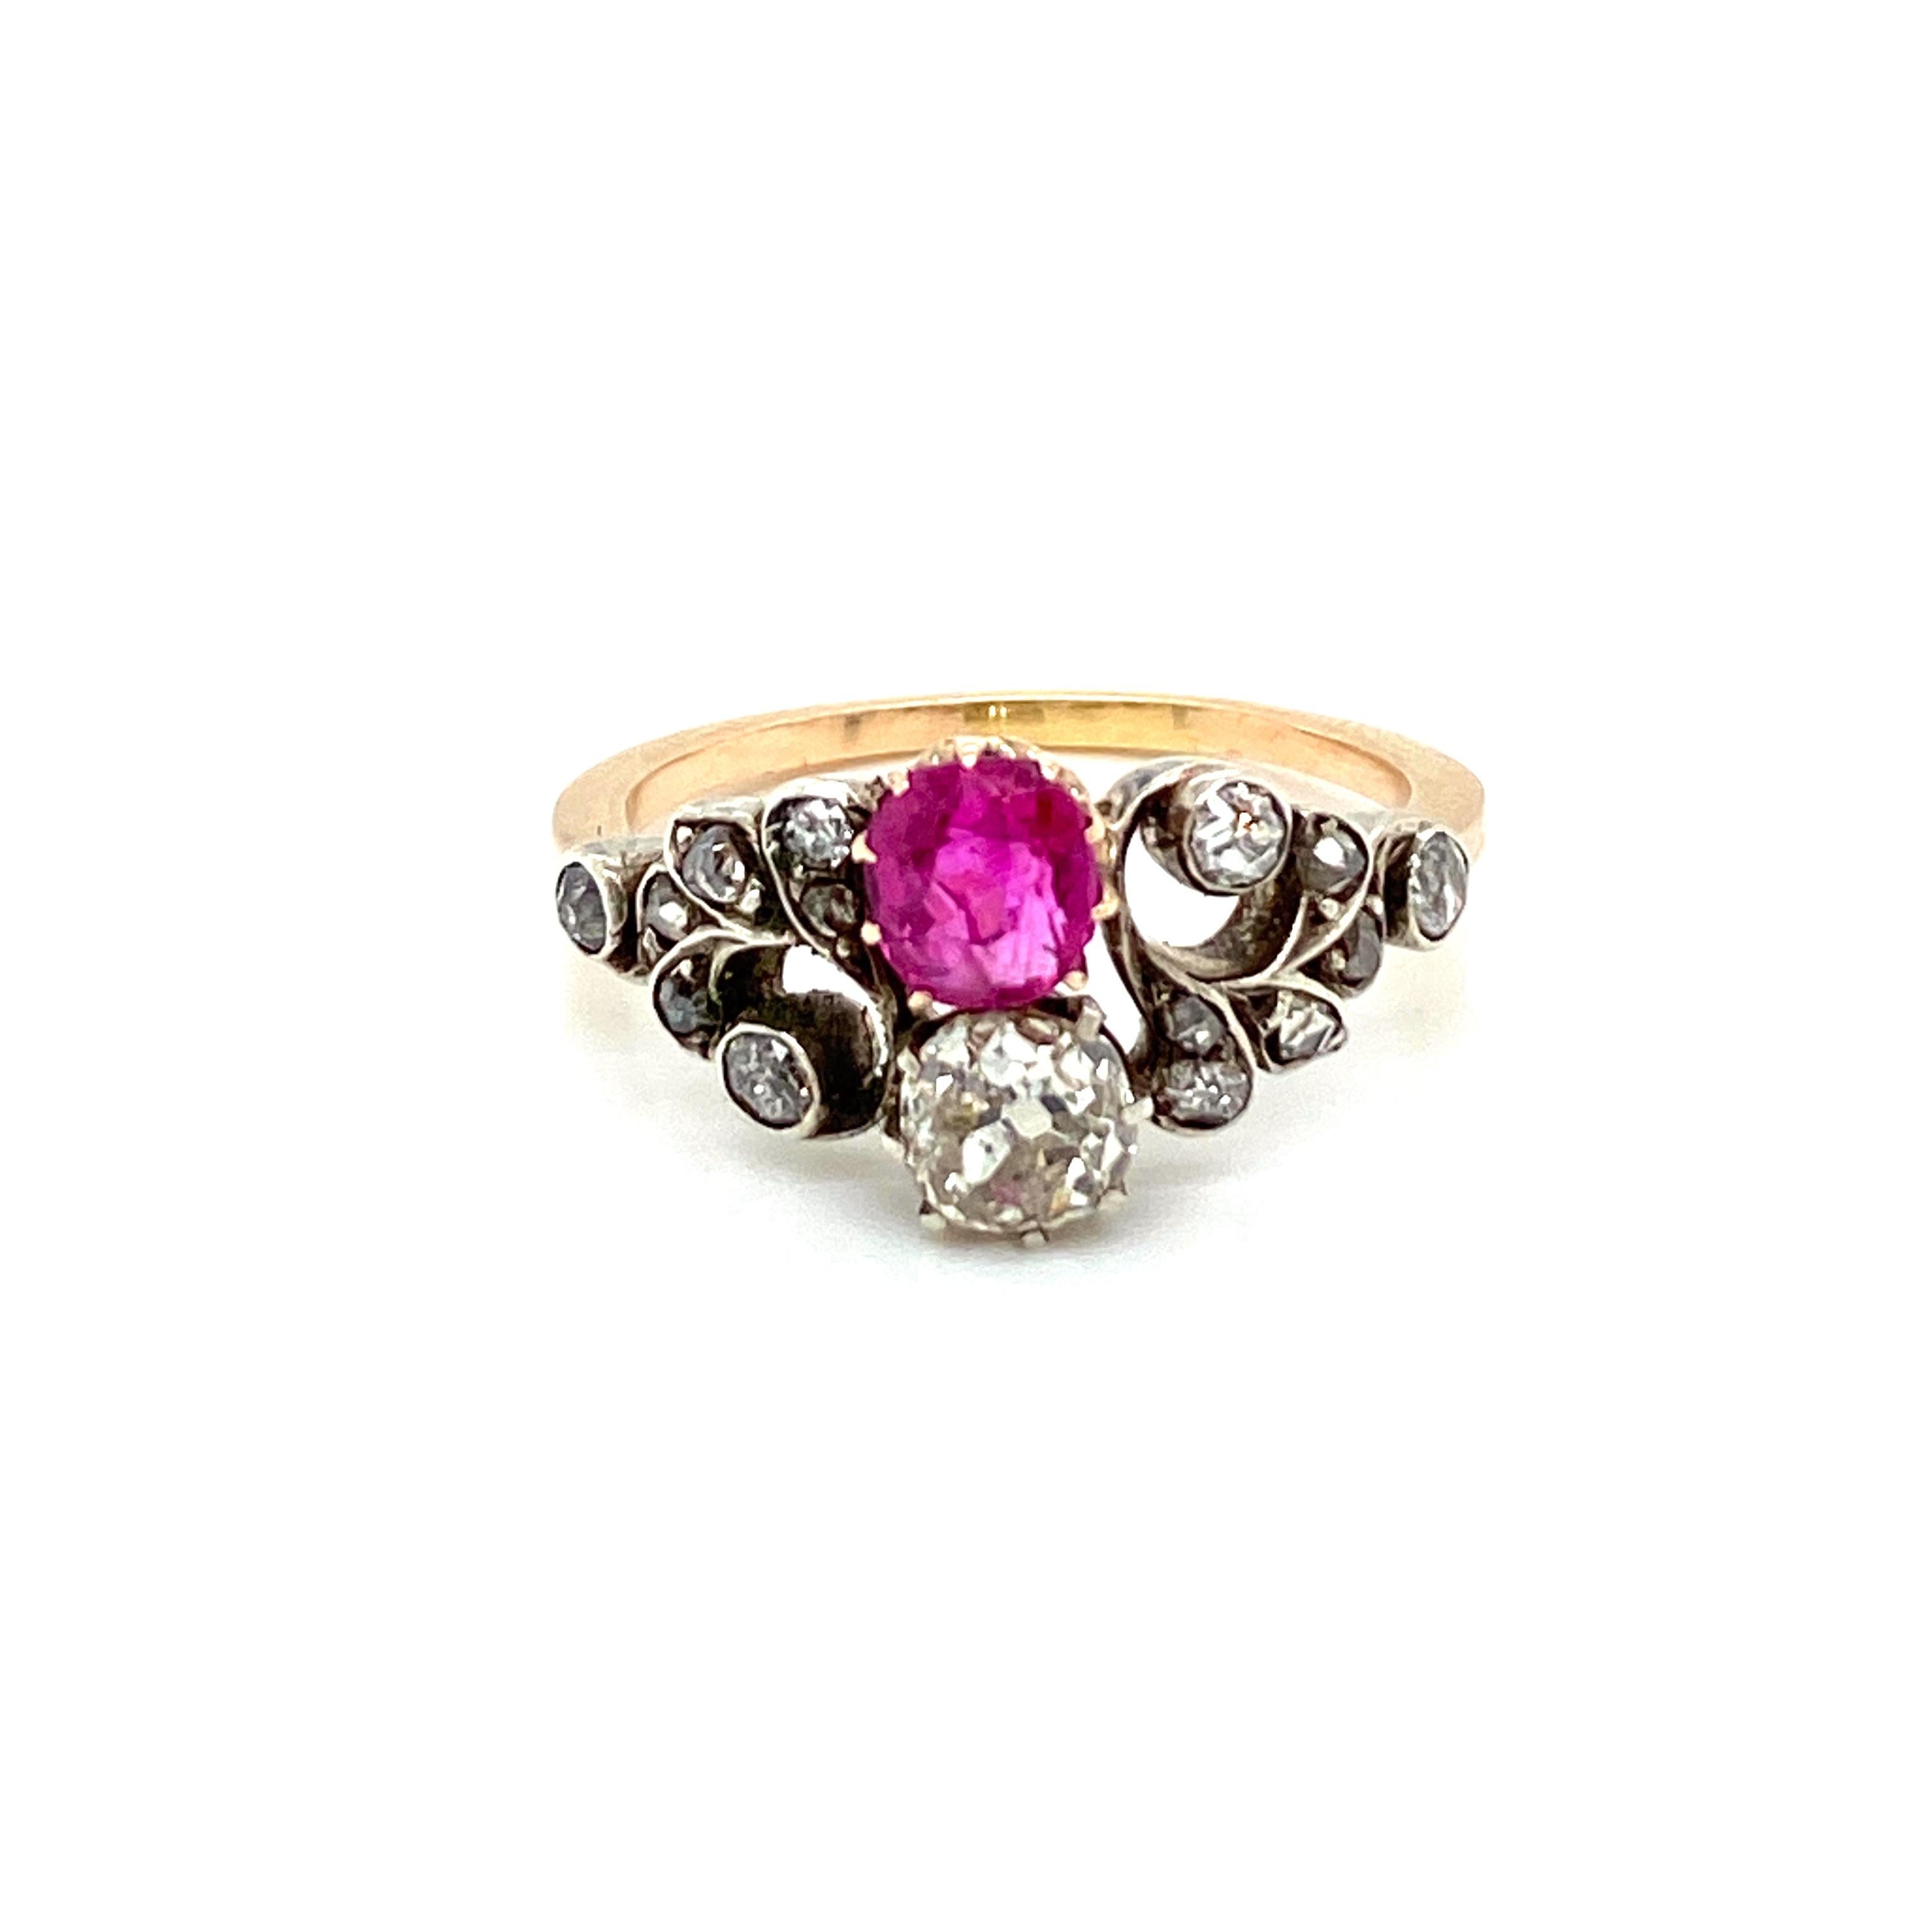 This Beautiful Authentic Victorian 12k gold and silver 'Vous et Moi' ring is set in the center with one vivid Natural unheated Ruby, 0,80 ct., and one Sparkling Old mine cut diamond weighing approx. 0.70 ct., graded H-I color Vs2.  The flower design